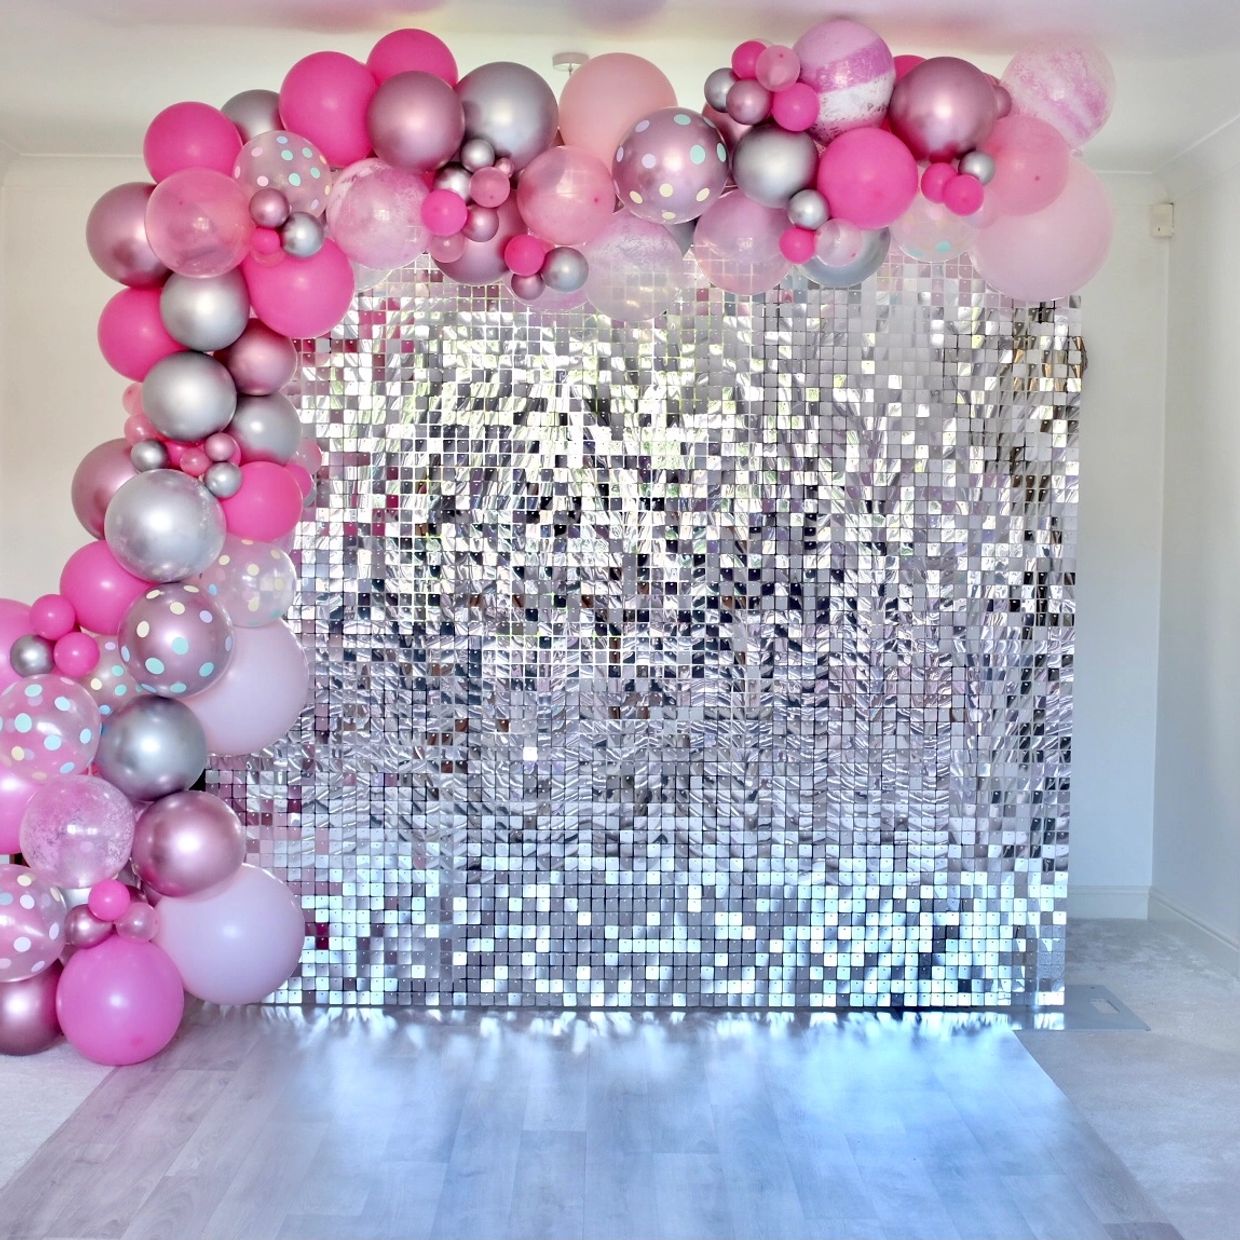 Sequin wall hire for birthday party, wedding. Perfect backdrop for photos. 